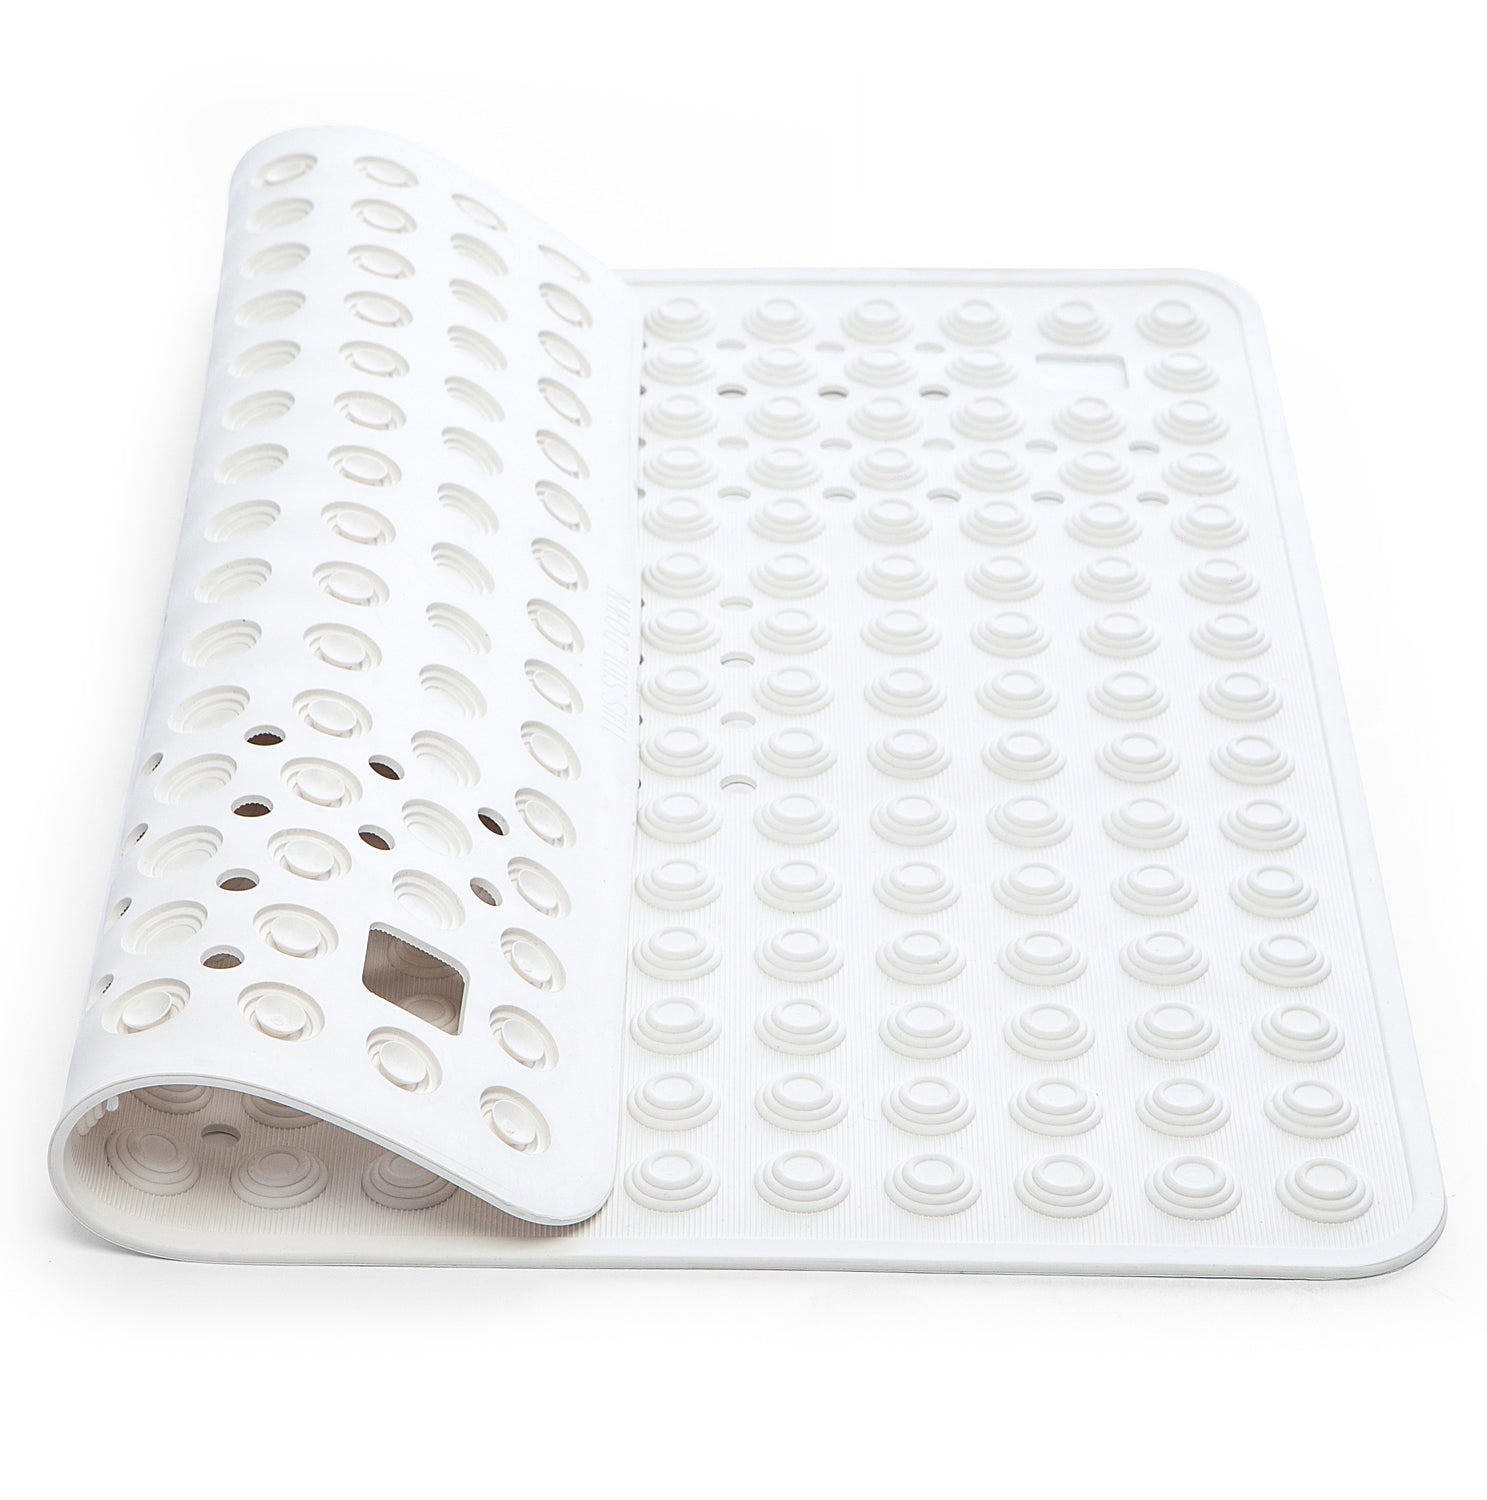 Invacare Non Slip Extra Long Bath Mat by Invacare - Bath Mats For